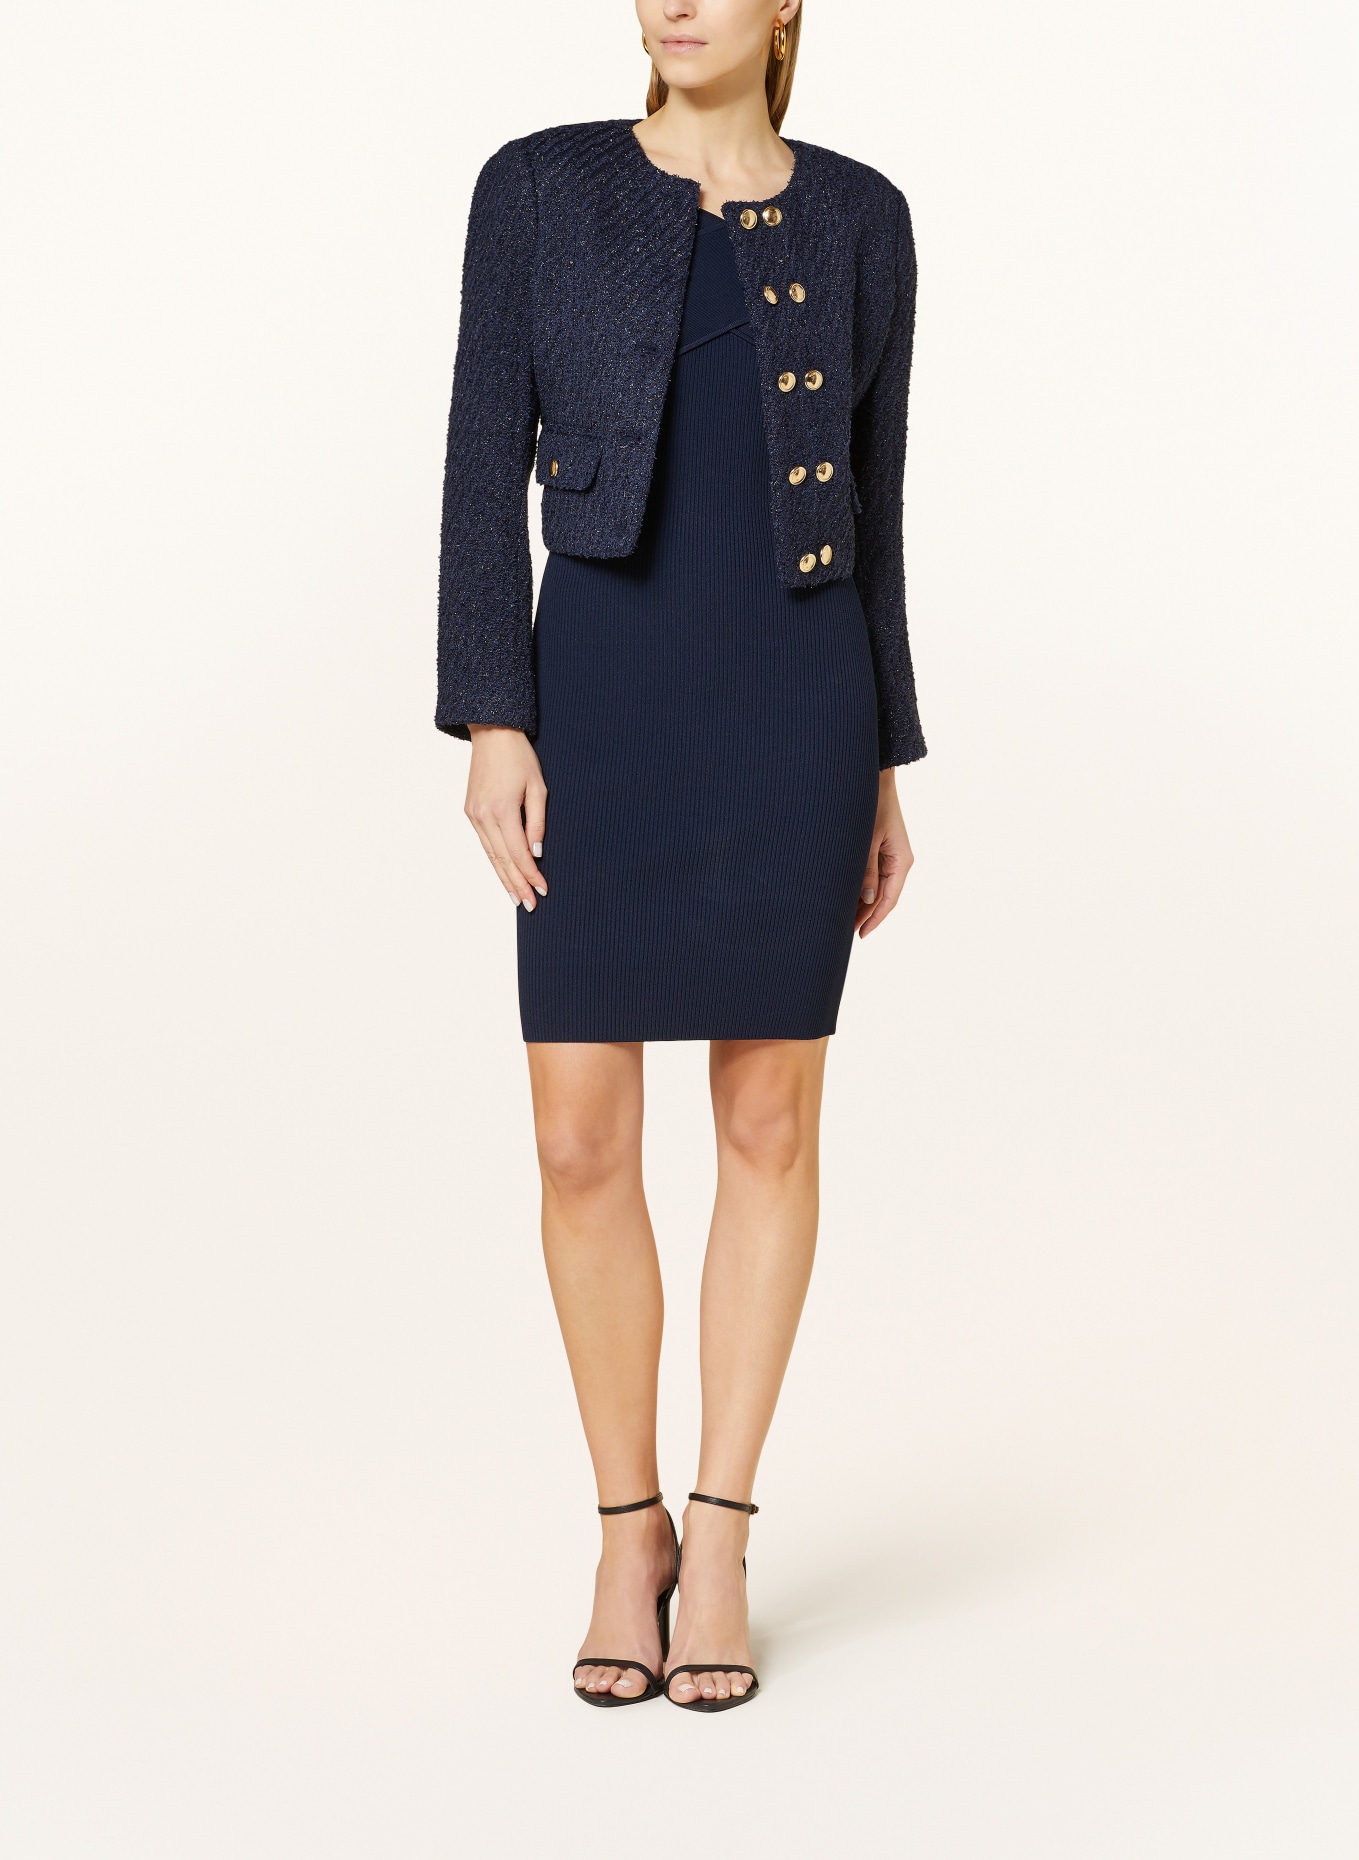 MICHAEL KORS Boxy jacket made of tweed with glitter thread, Color: DARK BLUE (Image 2)